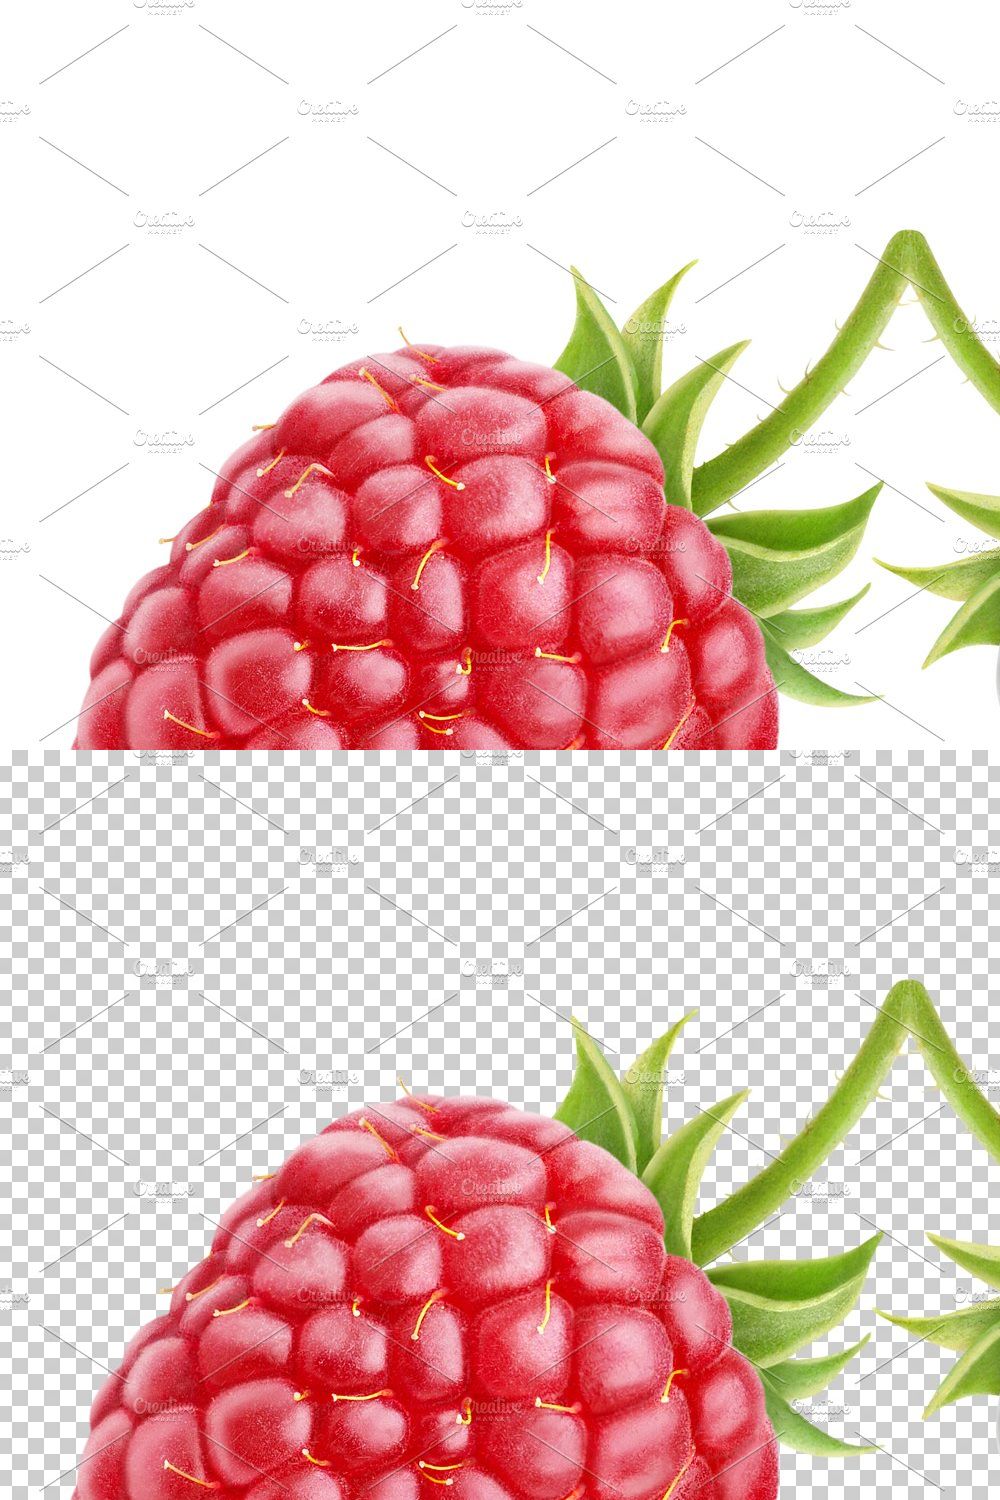 Raspberry and blackberry pinterest preview image.